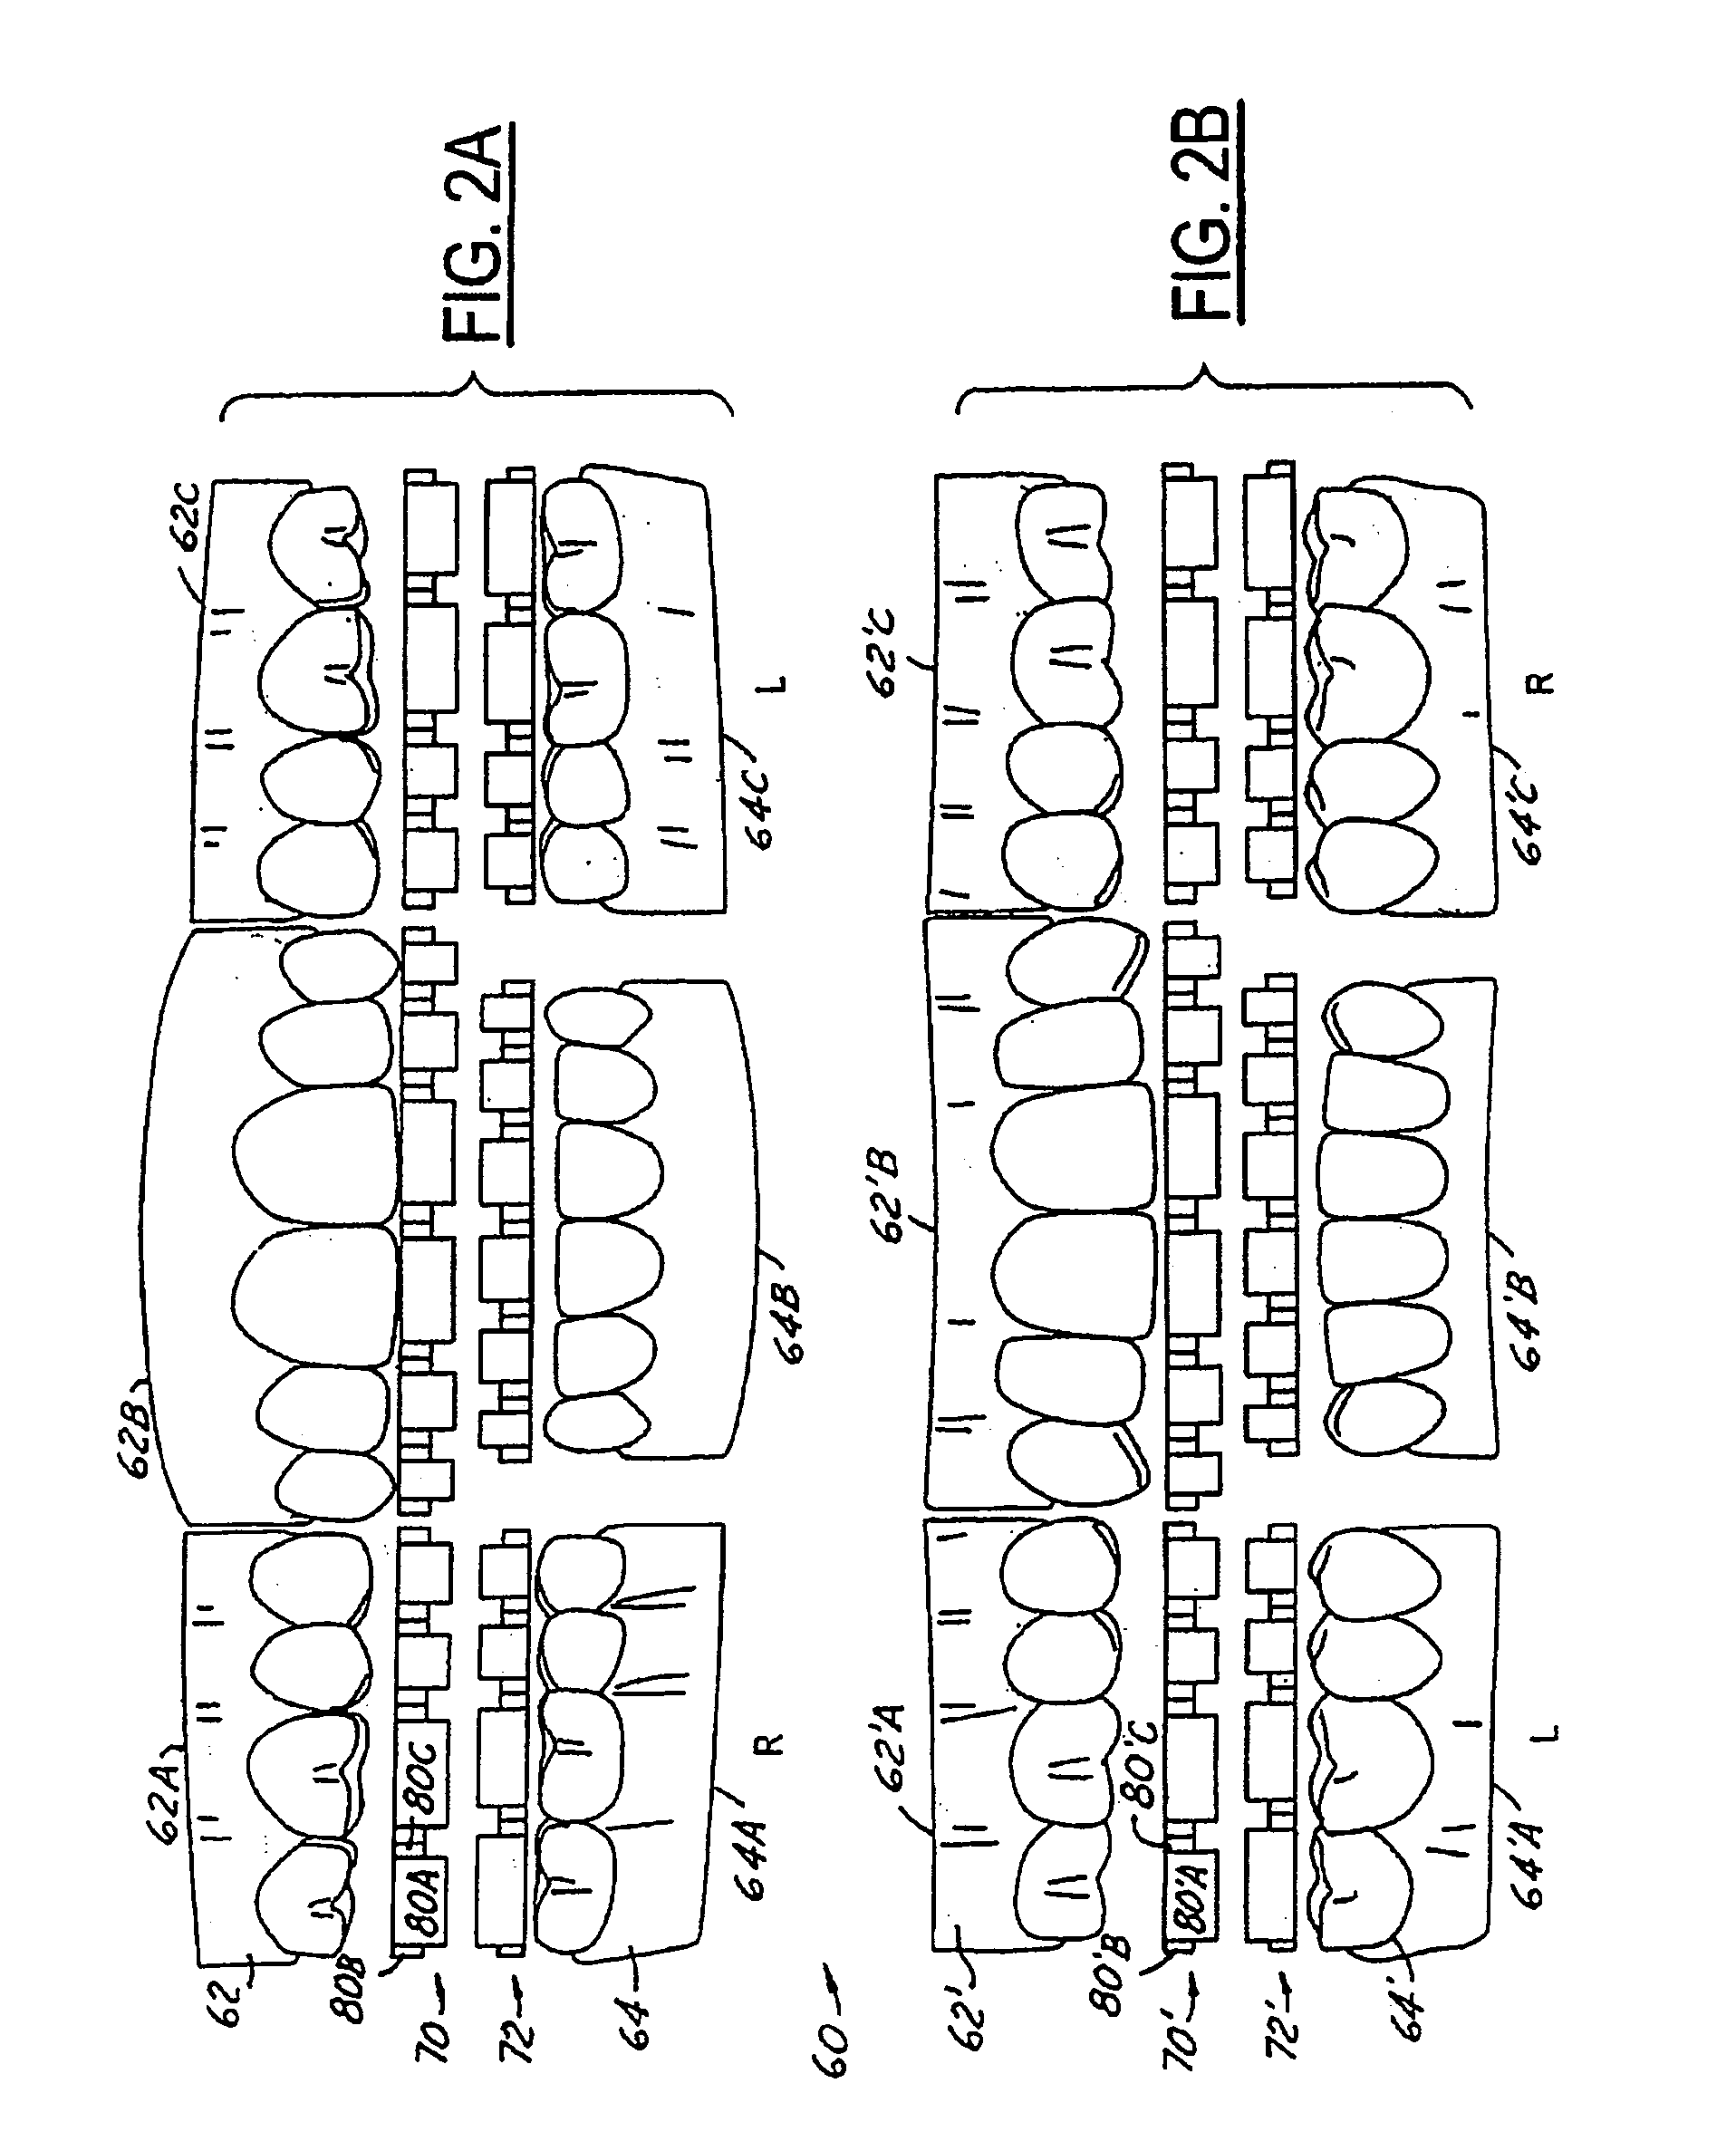 Method and system for periodontal charting